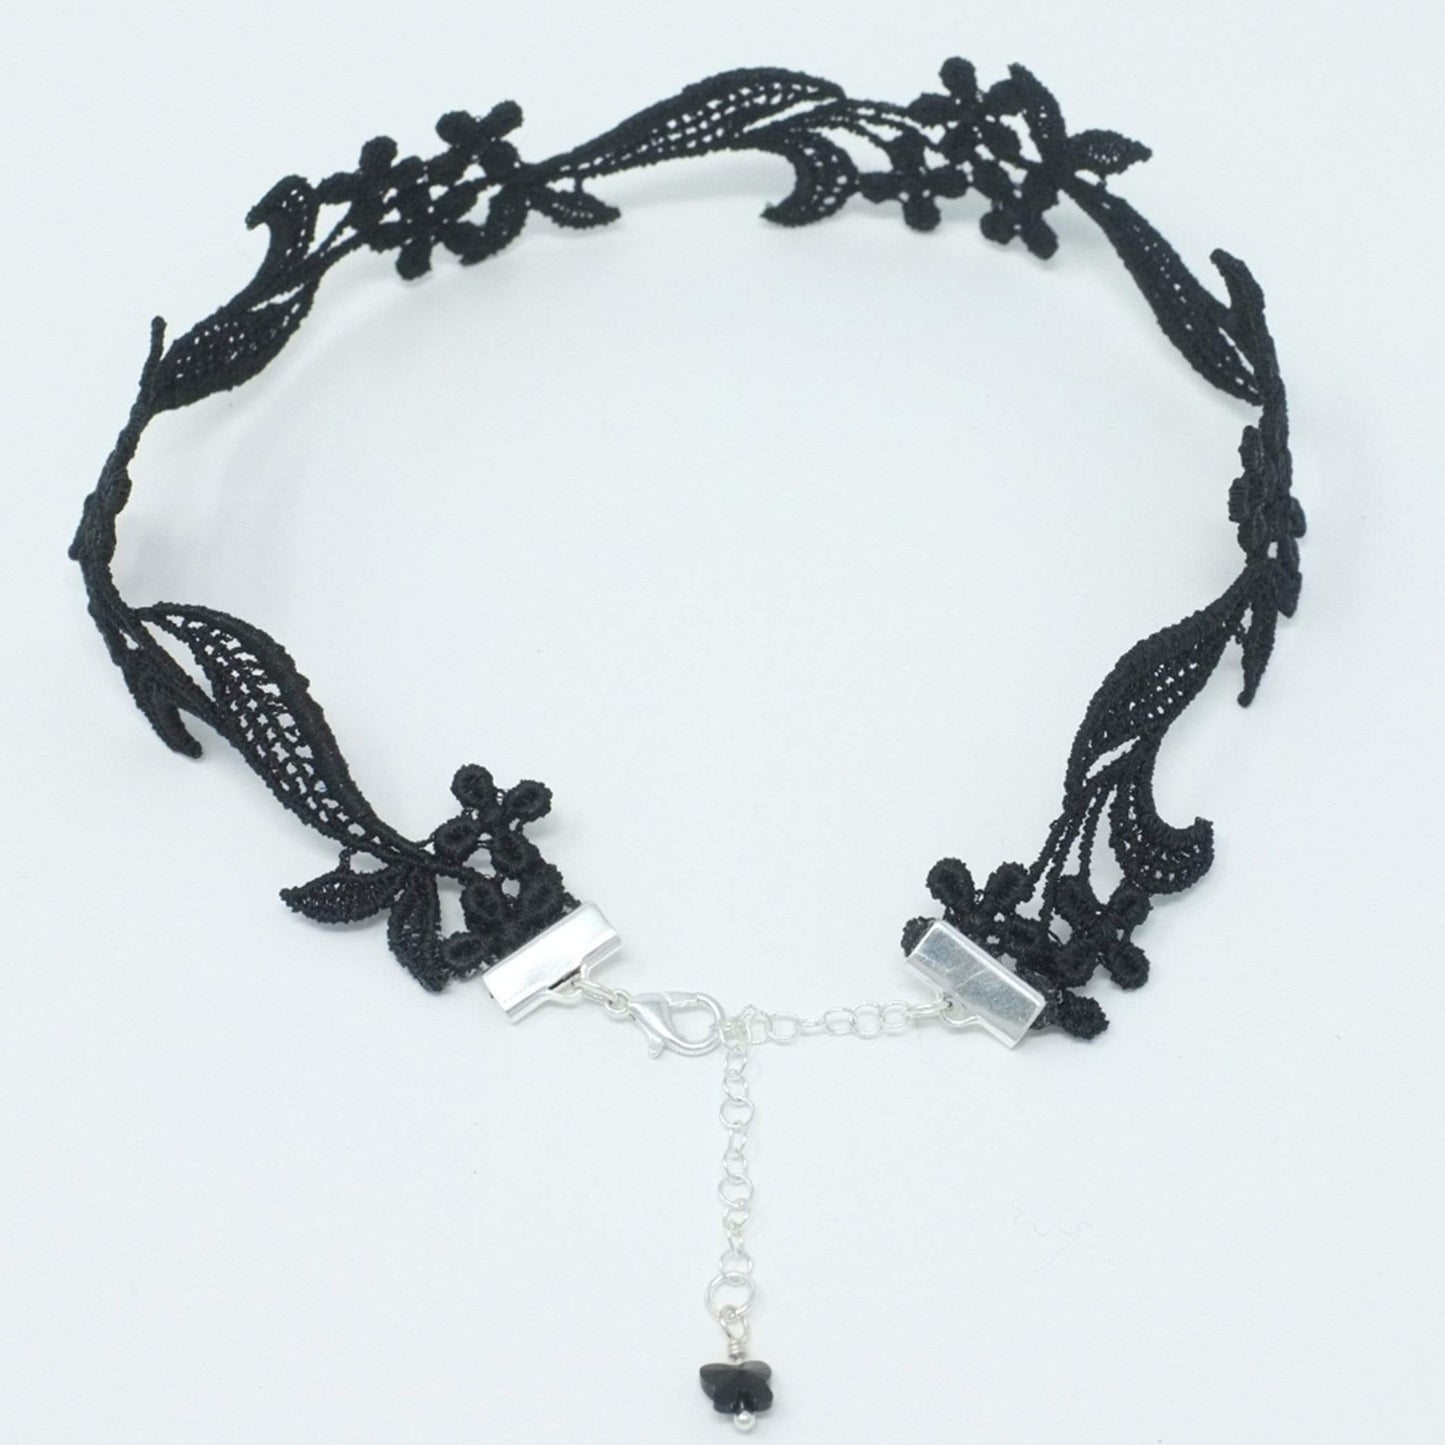 Top view of a black floral lace choker